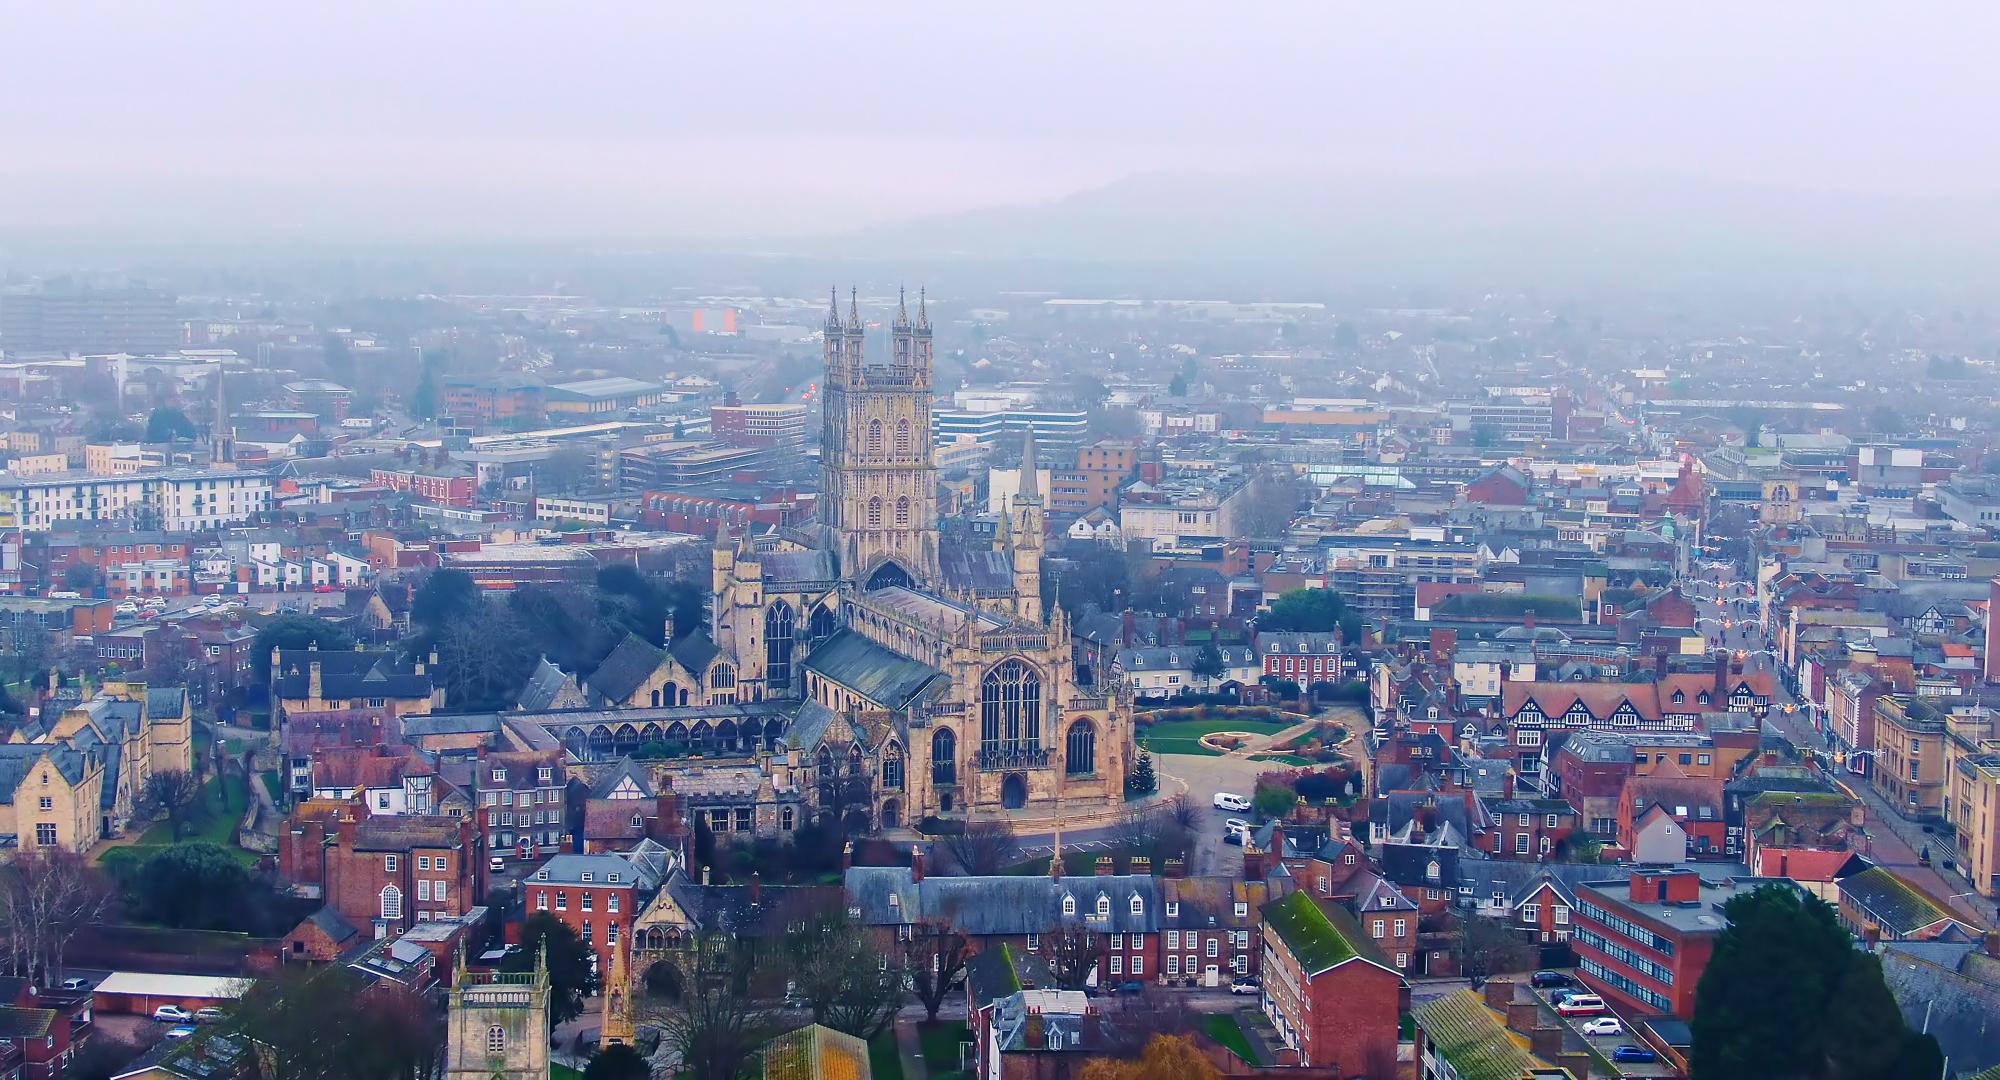 Aerial view over City of Gloucester